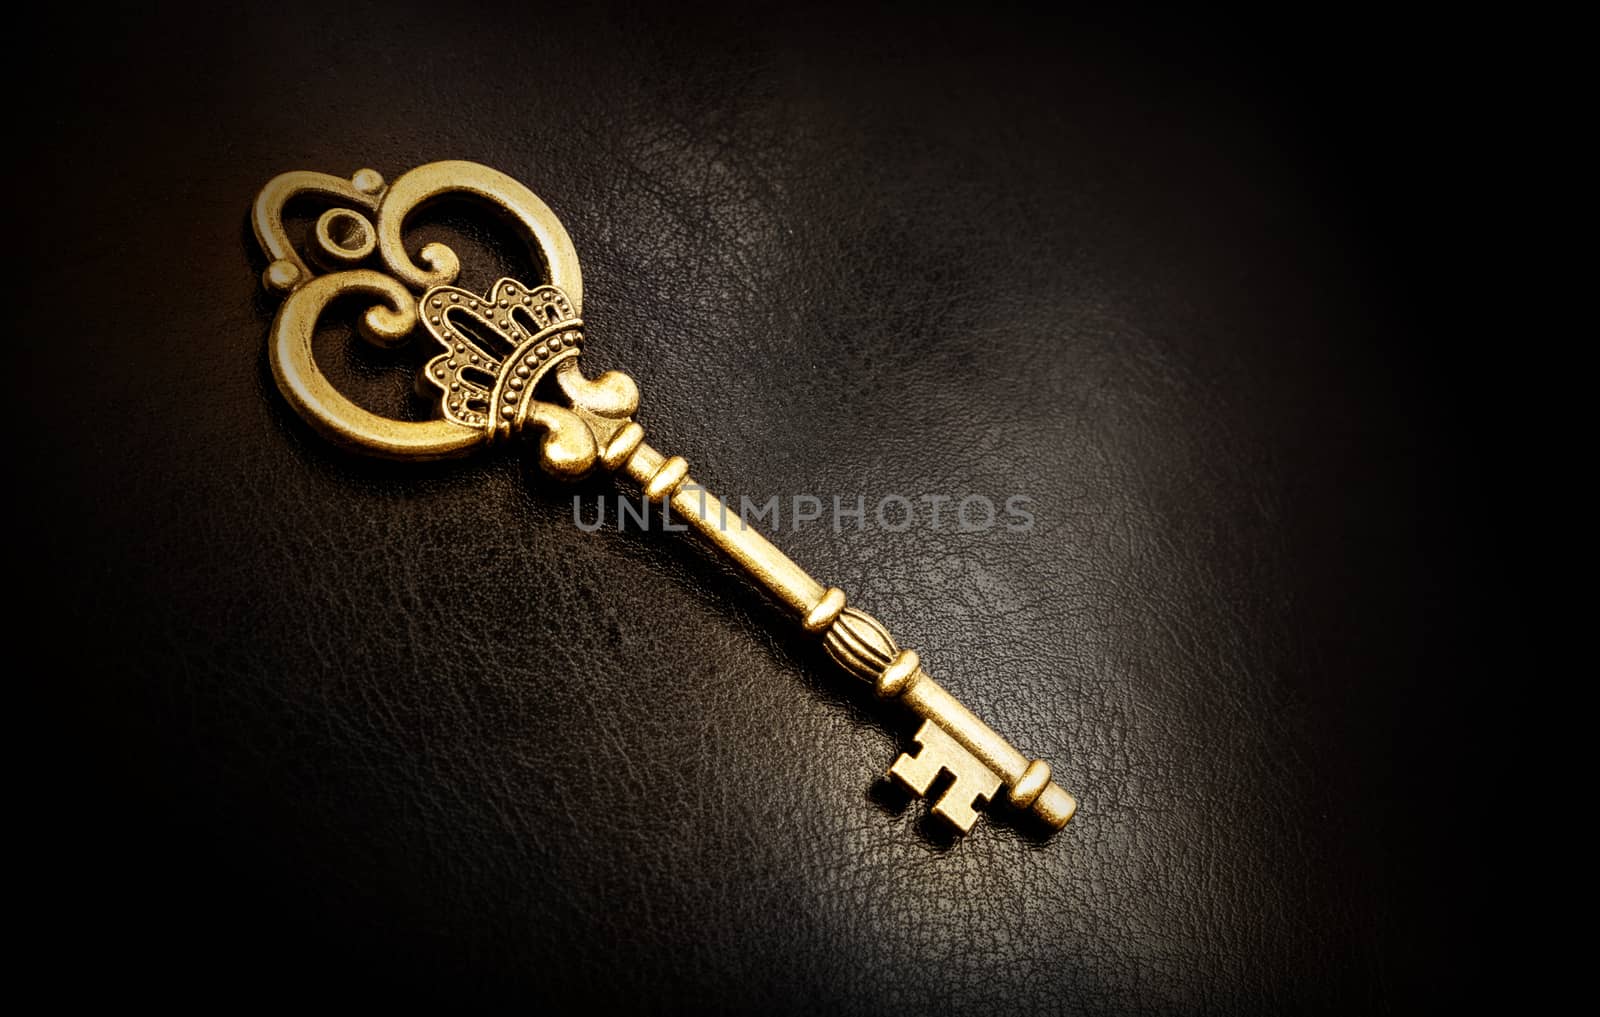 Old bronze key on a dark background, texture of the skin